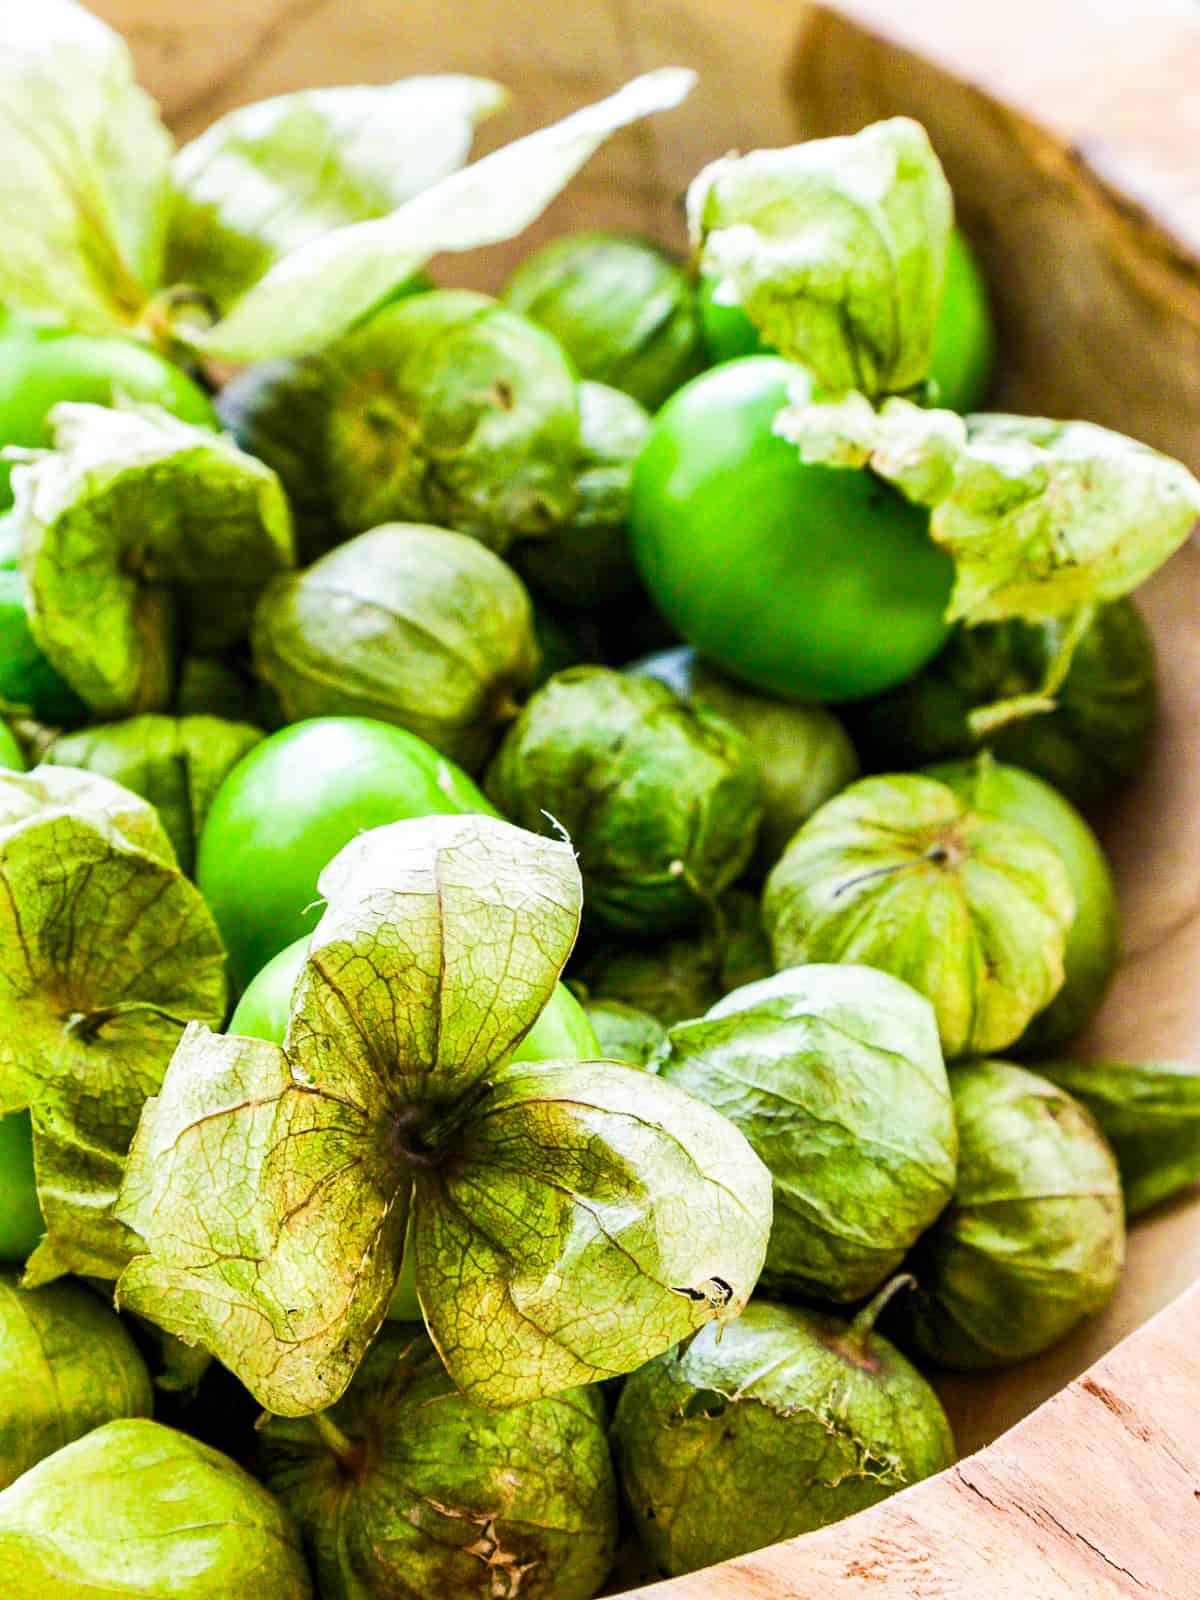 A wooden bowl with fresh green tomatillos ready to remove the paper husks and use in a Mexican food recipe.